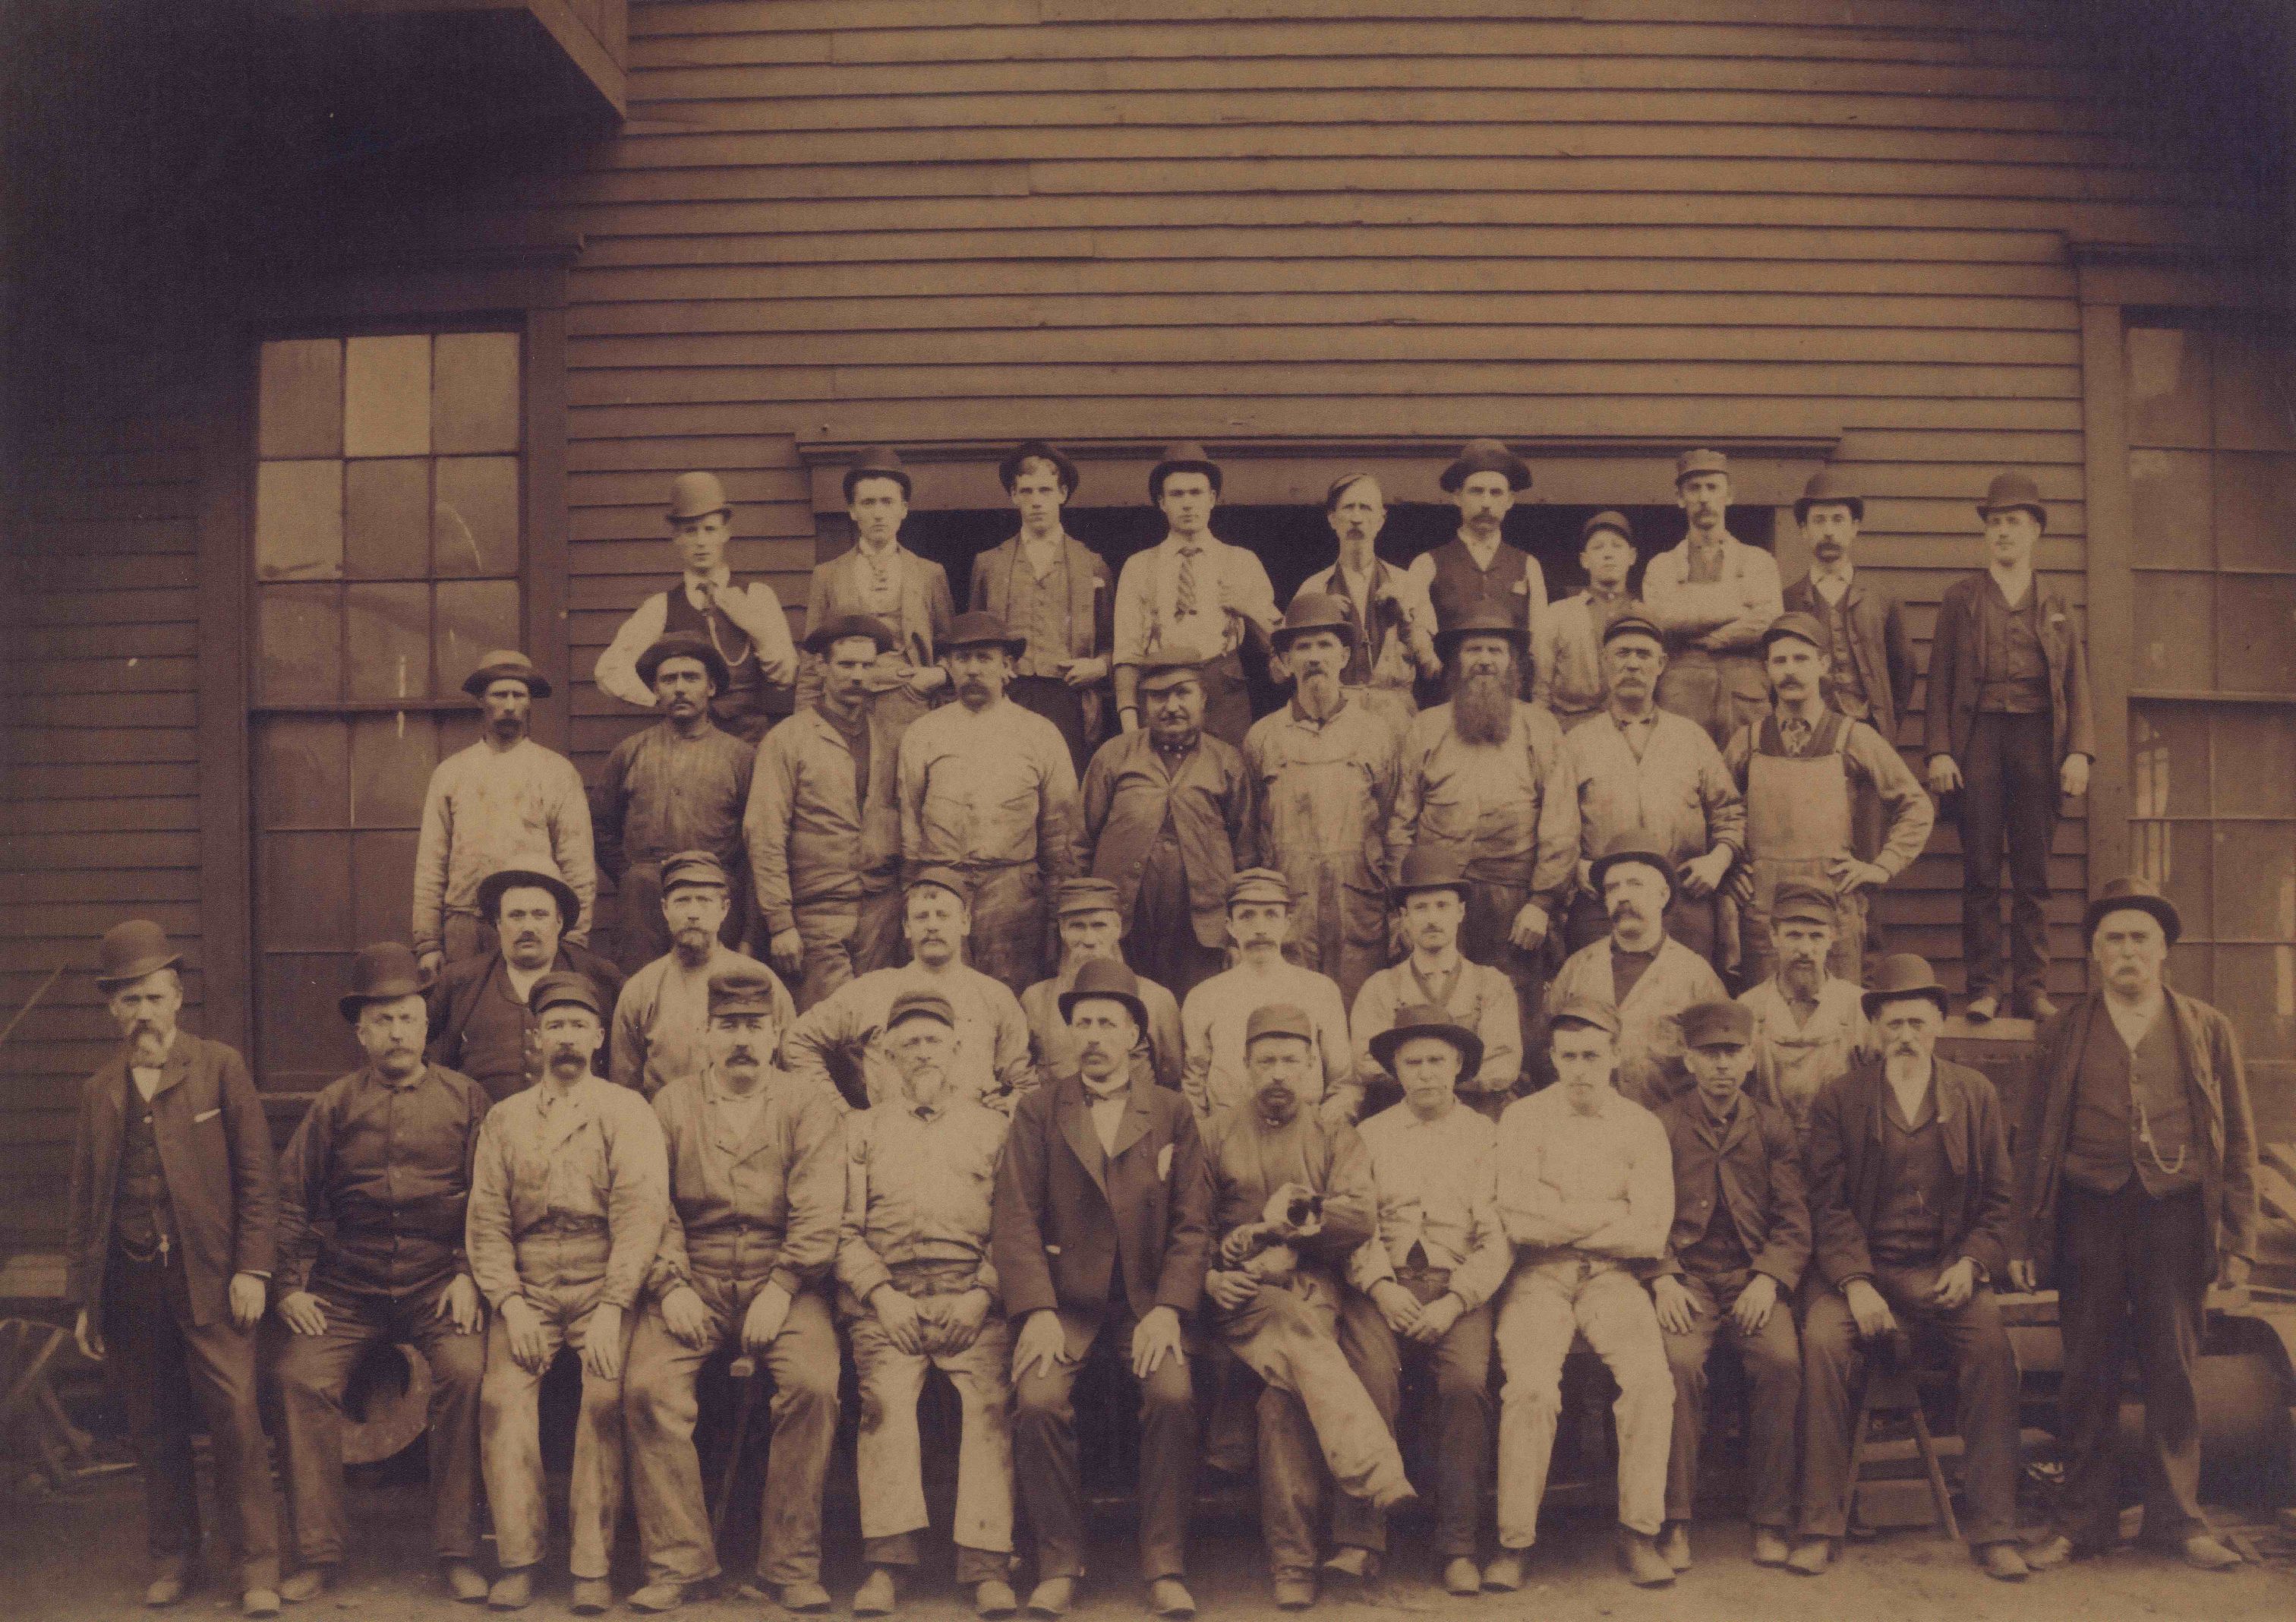 39 employees pose for a photograph at the Bay View Rolling Mill. This photo was taken in 1886, the year of the large and deadly workers' strike.